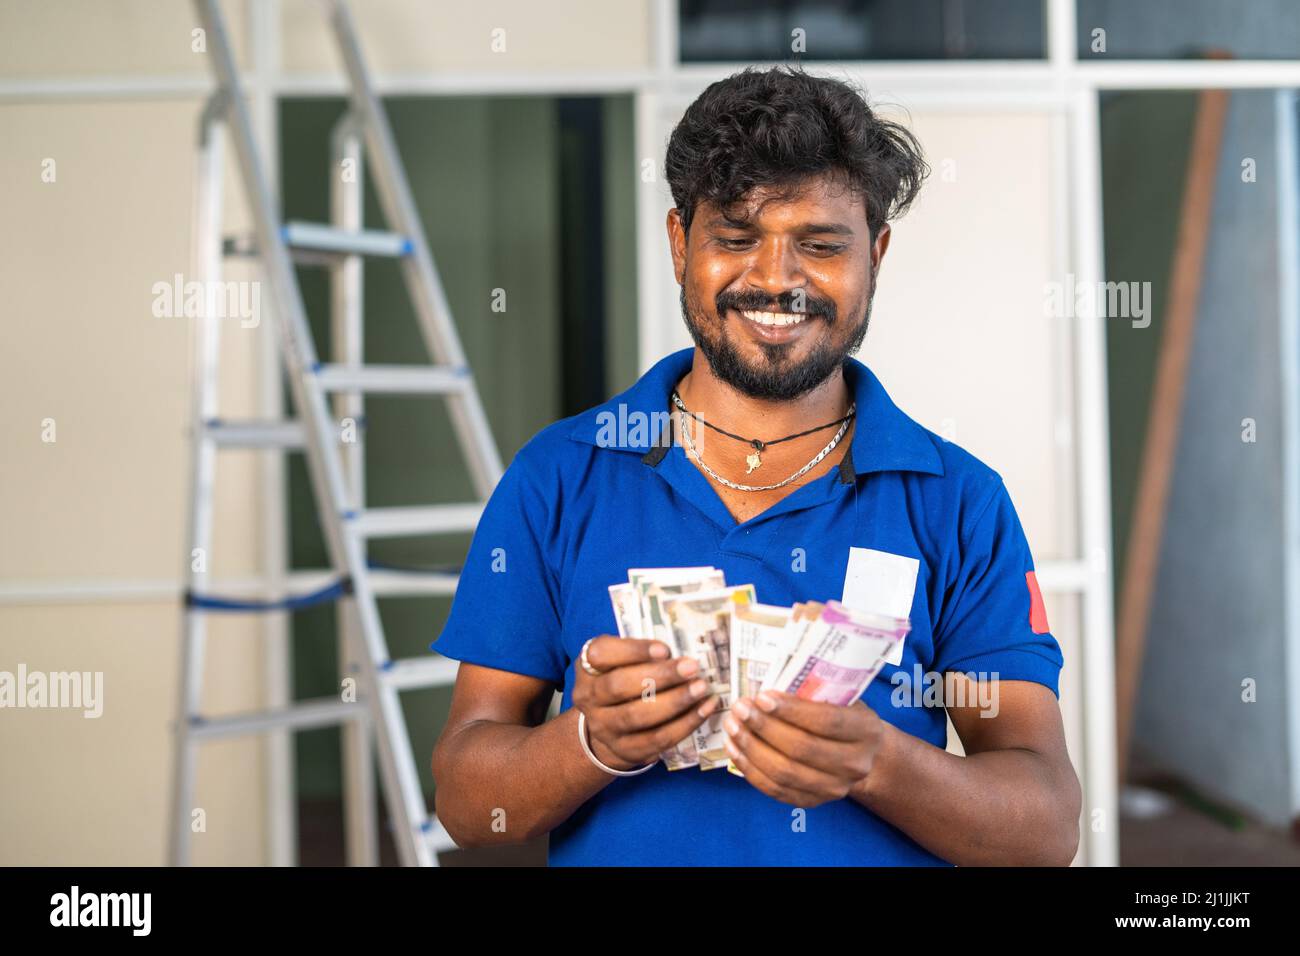 Smiling aluminium worker counting indian money at workplace - concept of banking support, earning or profit and maintenance or repair service. Stock Photo